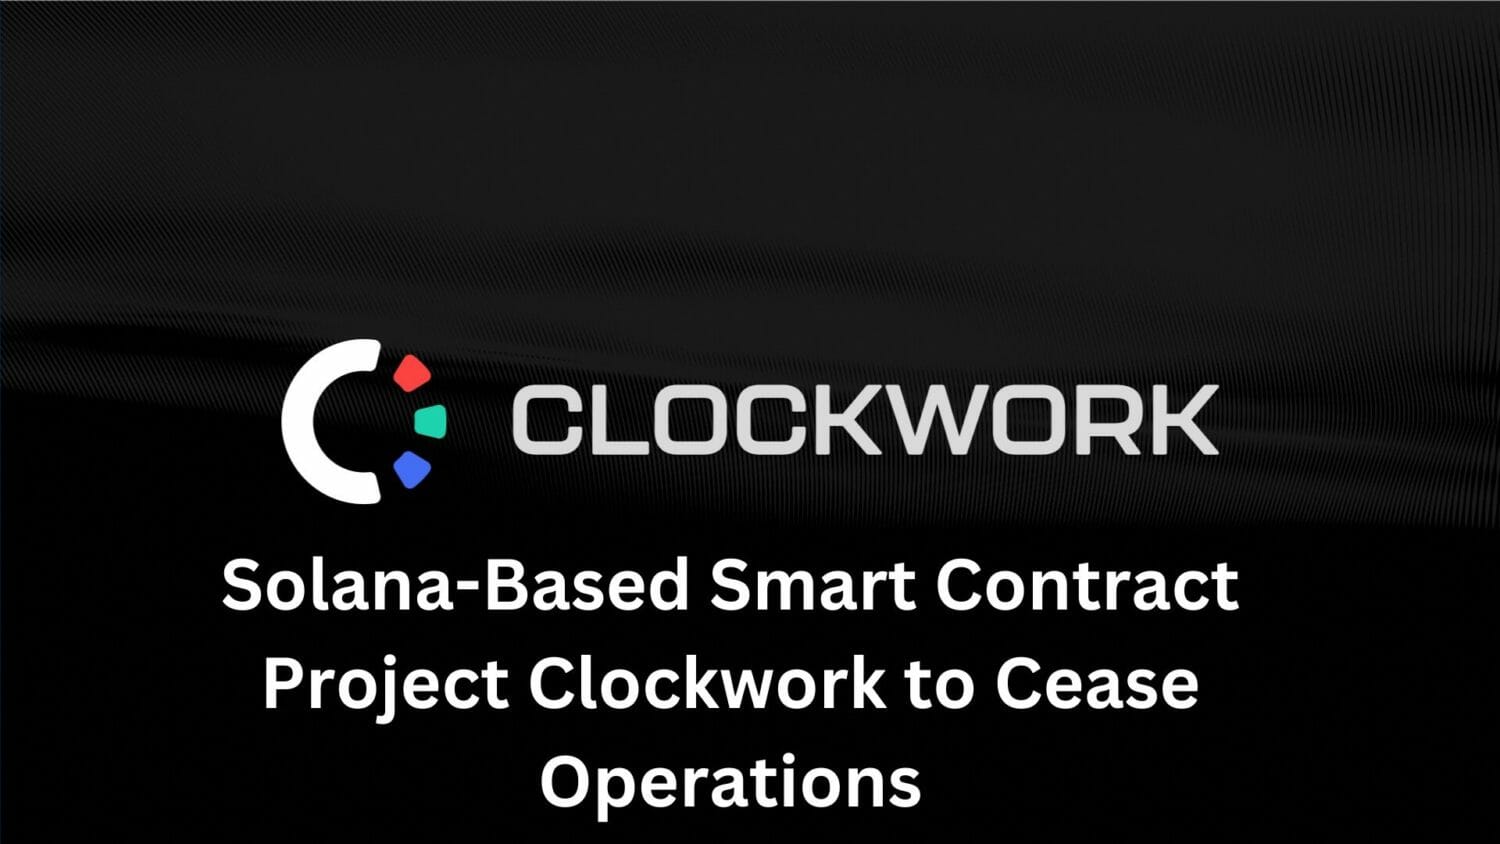 Solana-Based Smart Contract Project Clockwork To Cease Operations